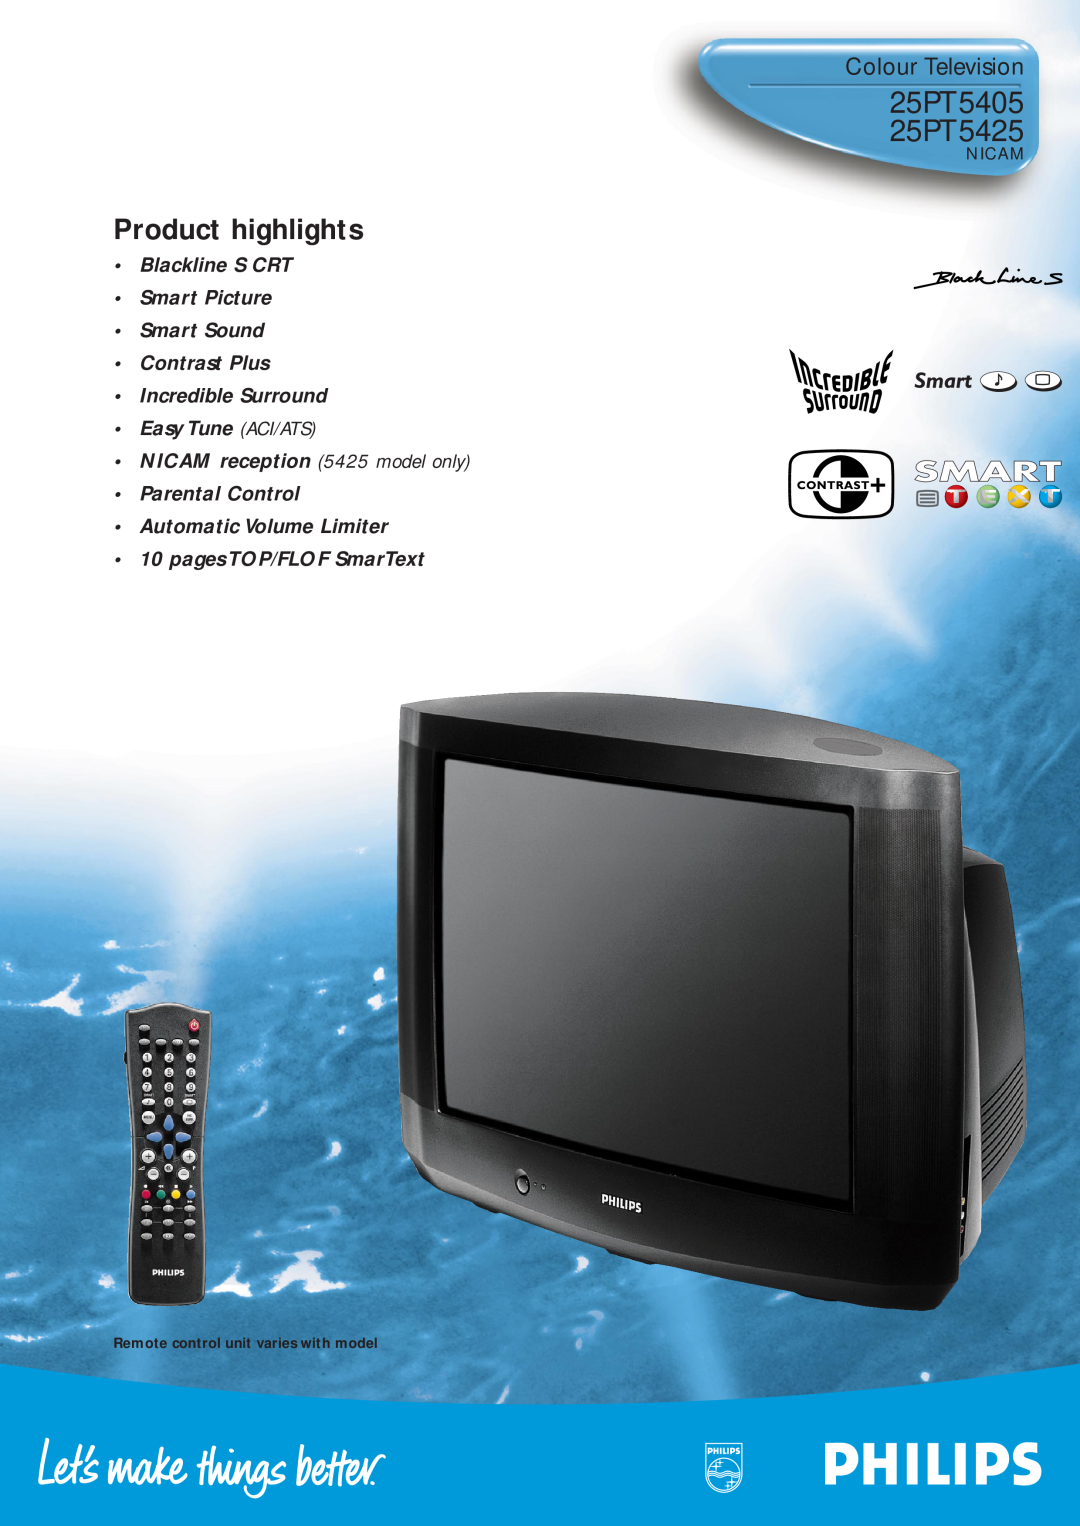 Philips manual 25PT5405 25PT5425, Product highlights, Colour Television, Nicam, Remote control unit varies with model 